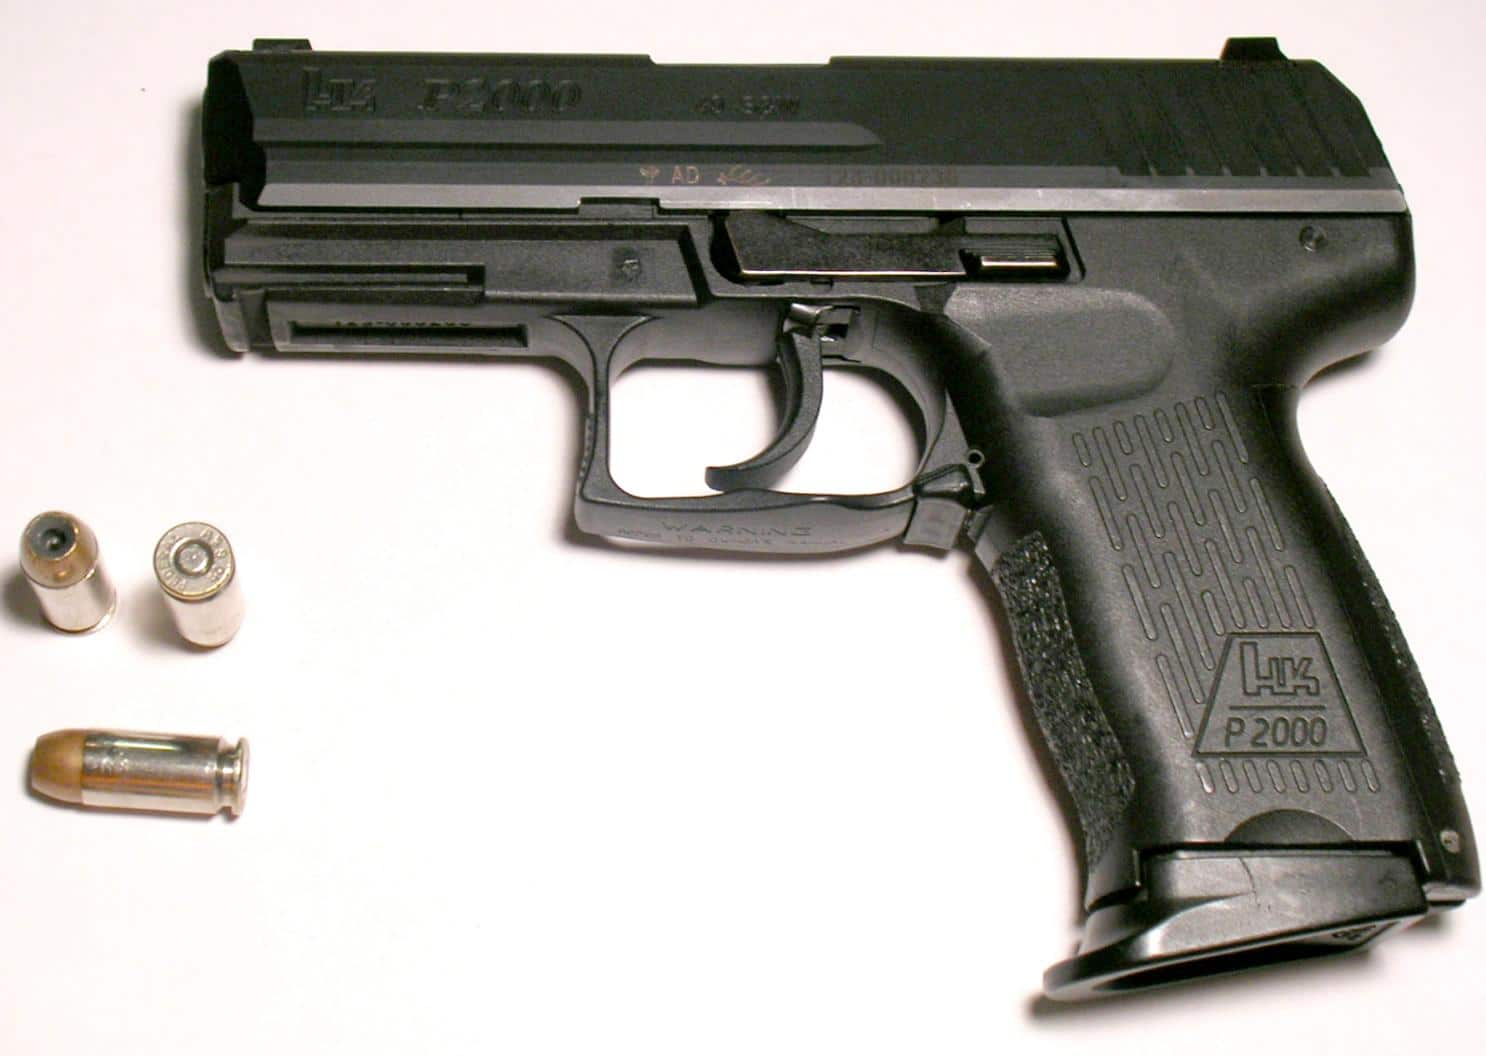 The Heckler and Koch P2000 Compact Pistol: An Unbiased Review